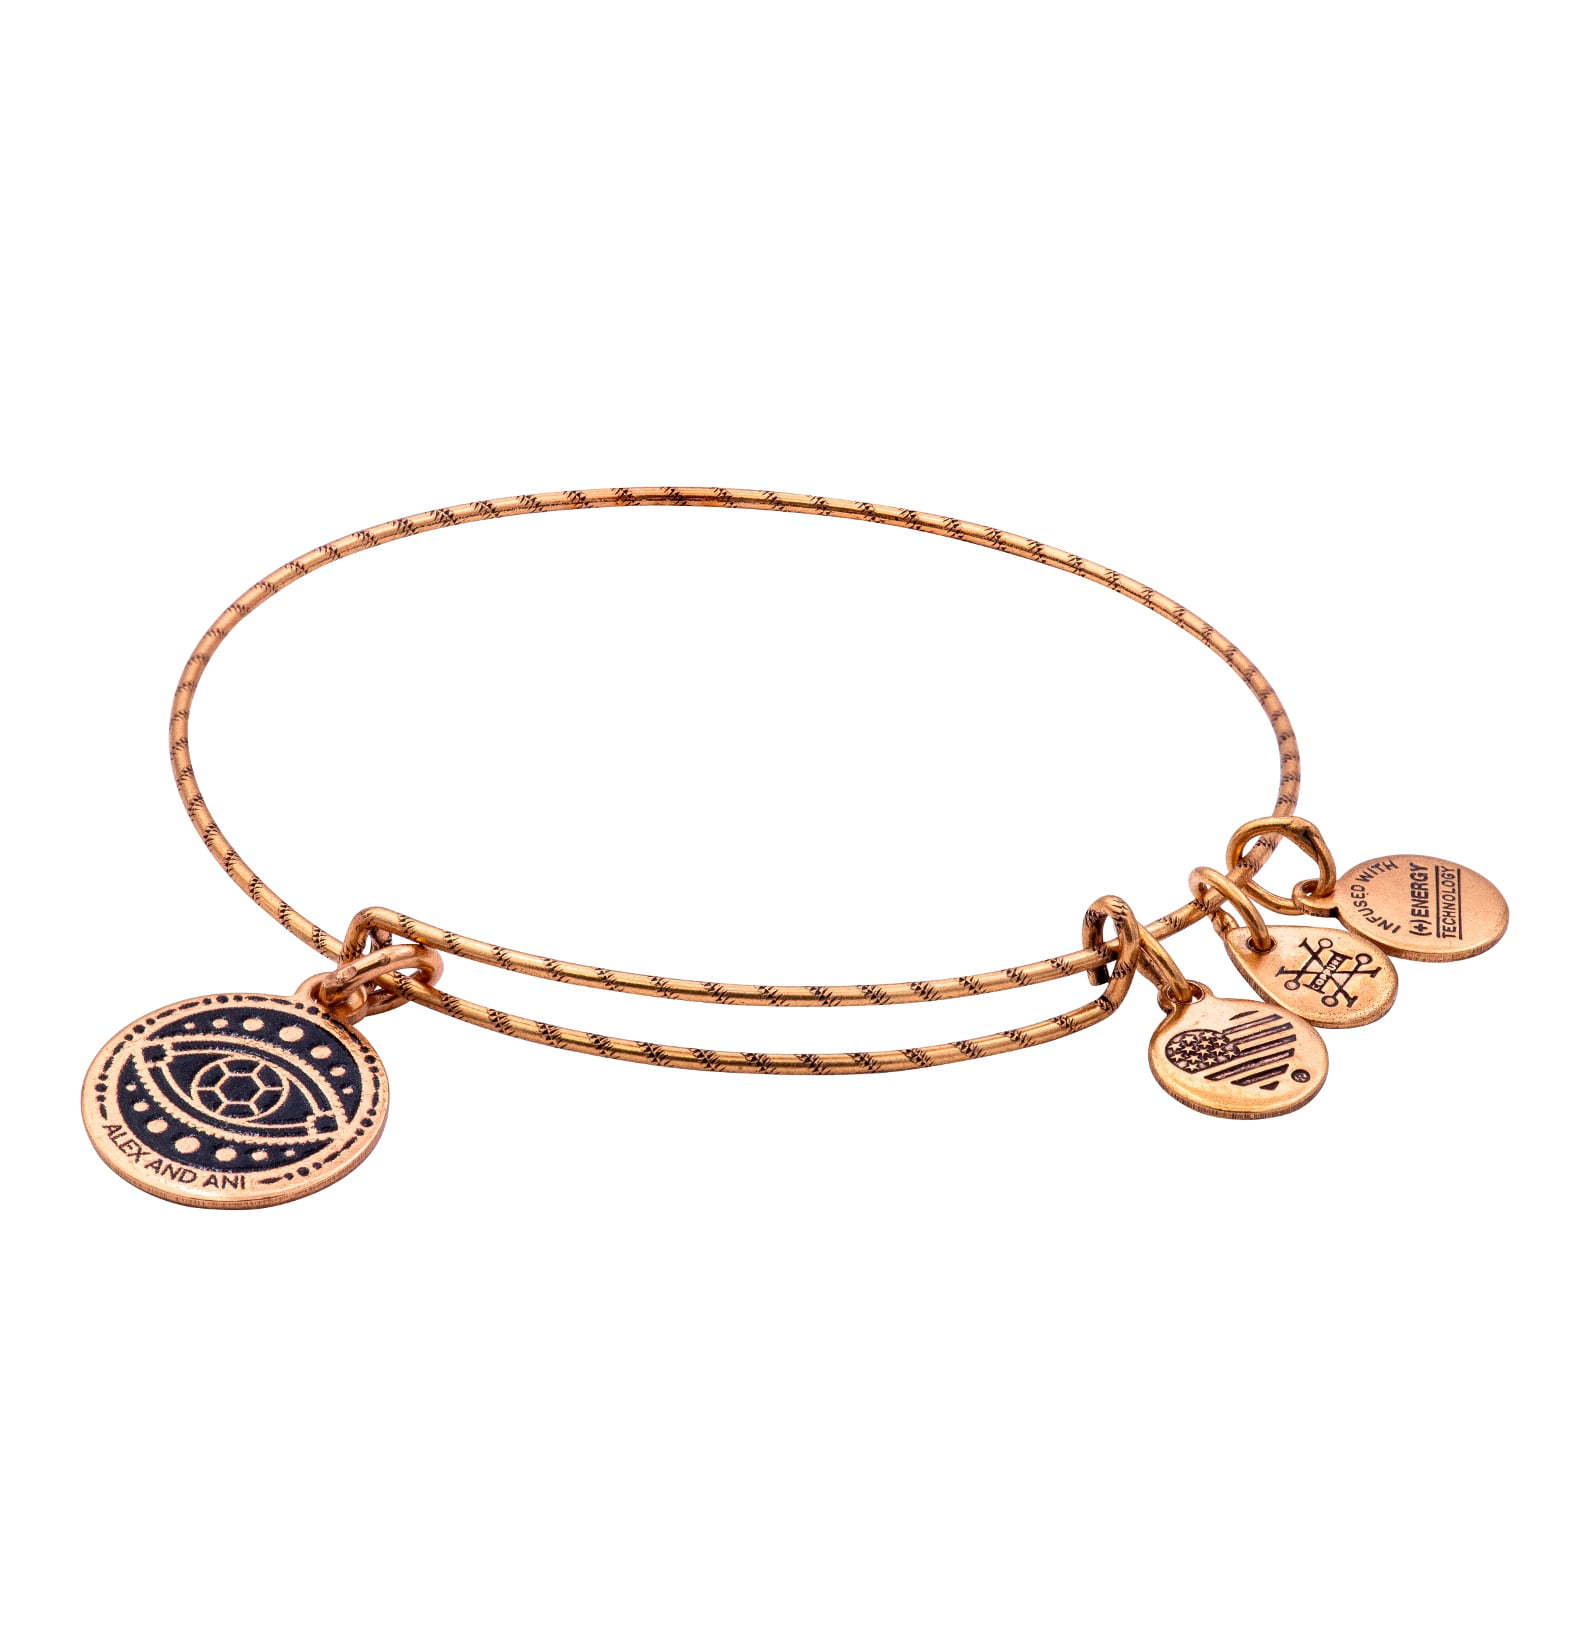 Alex and Ani Women's Embossed Paint Charm Evil Eye Charm Bangle Silver,...